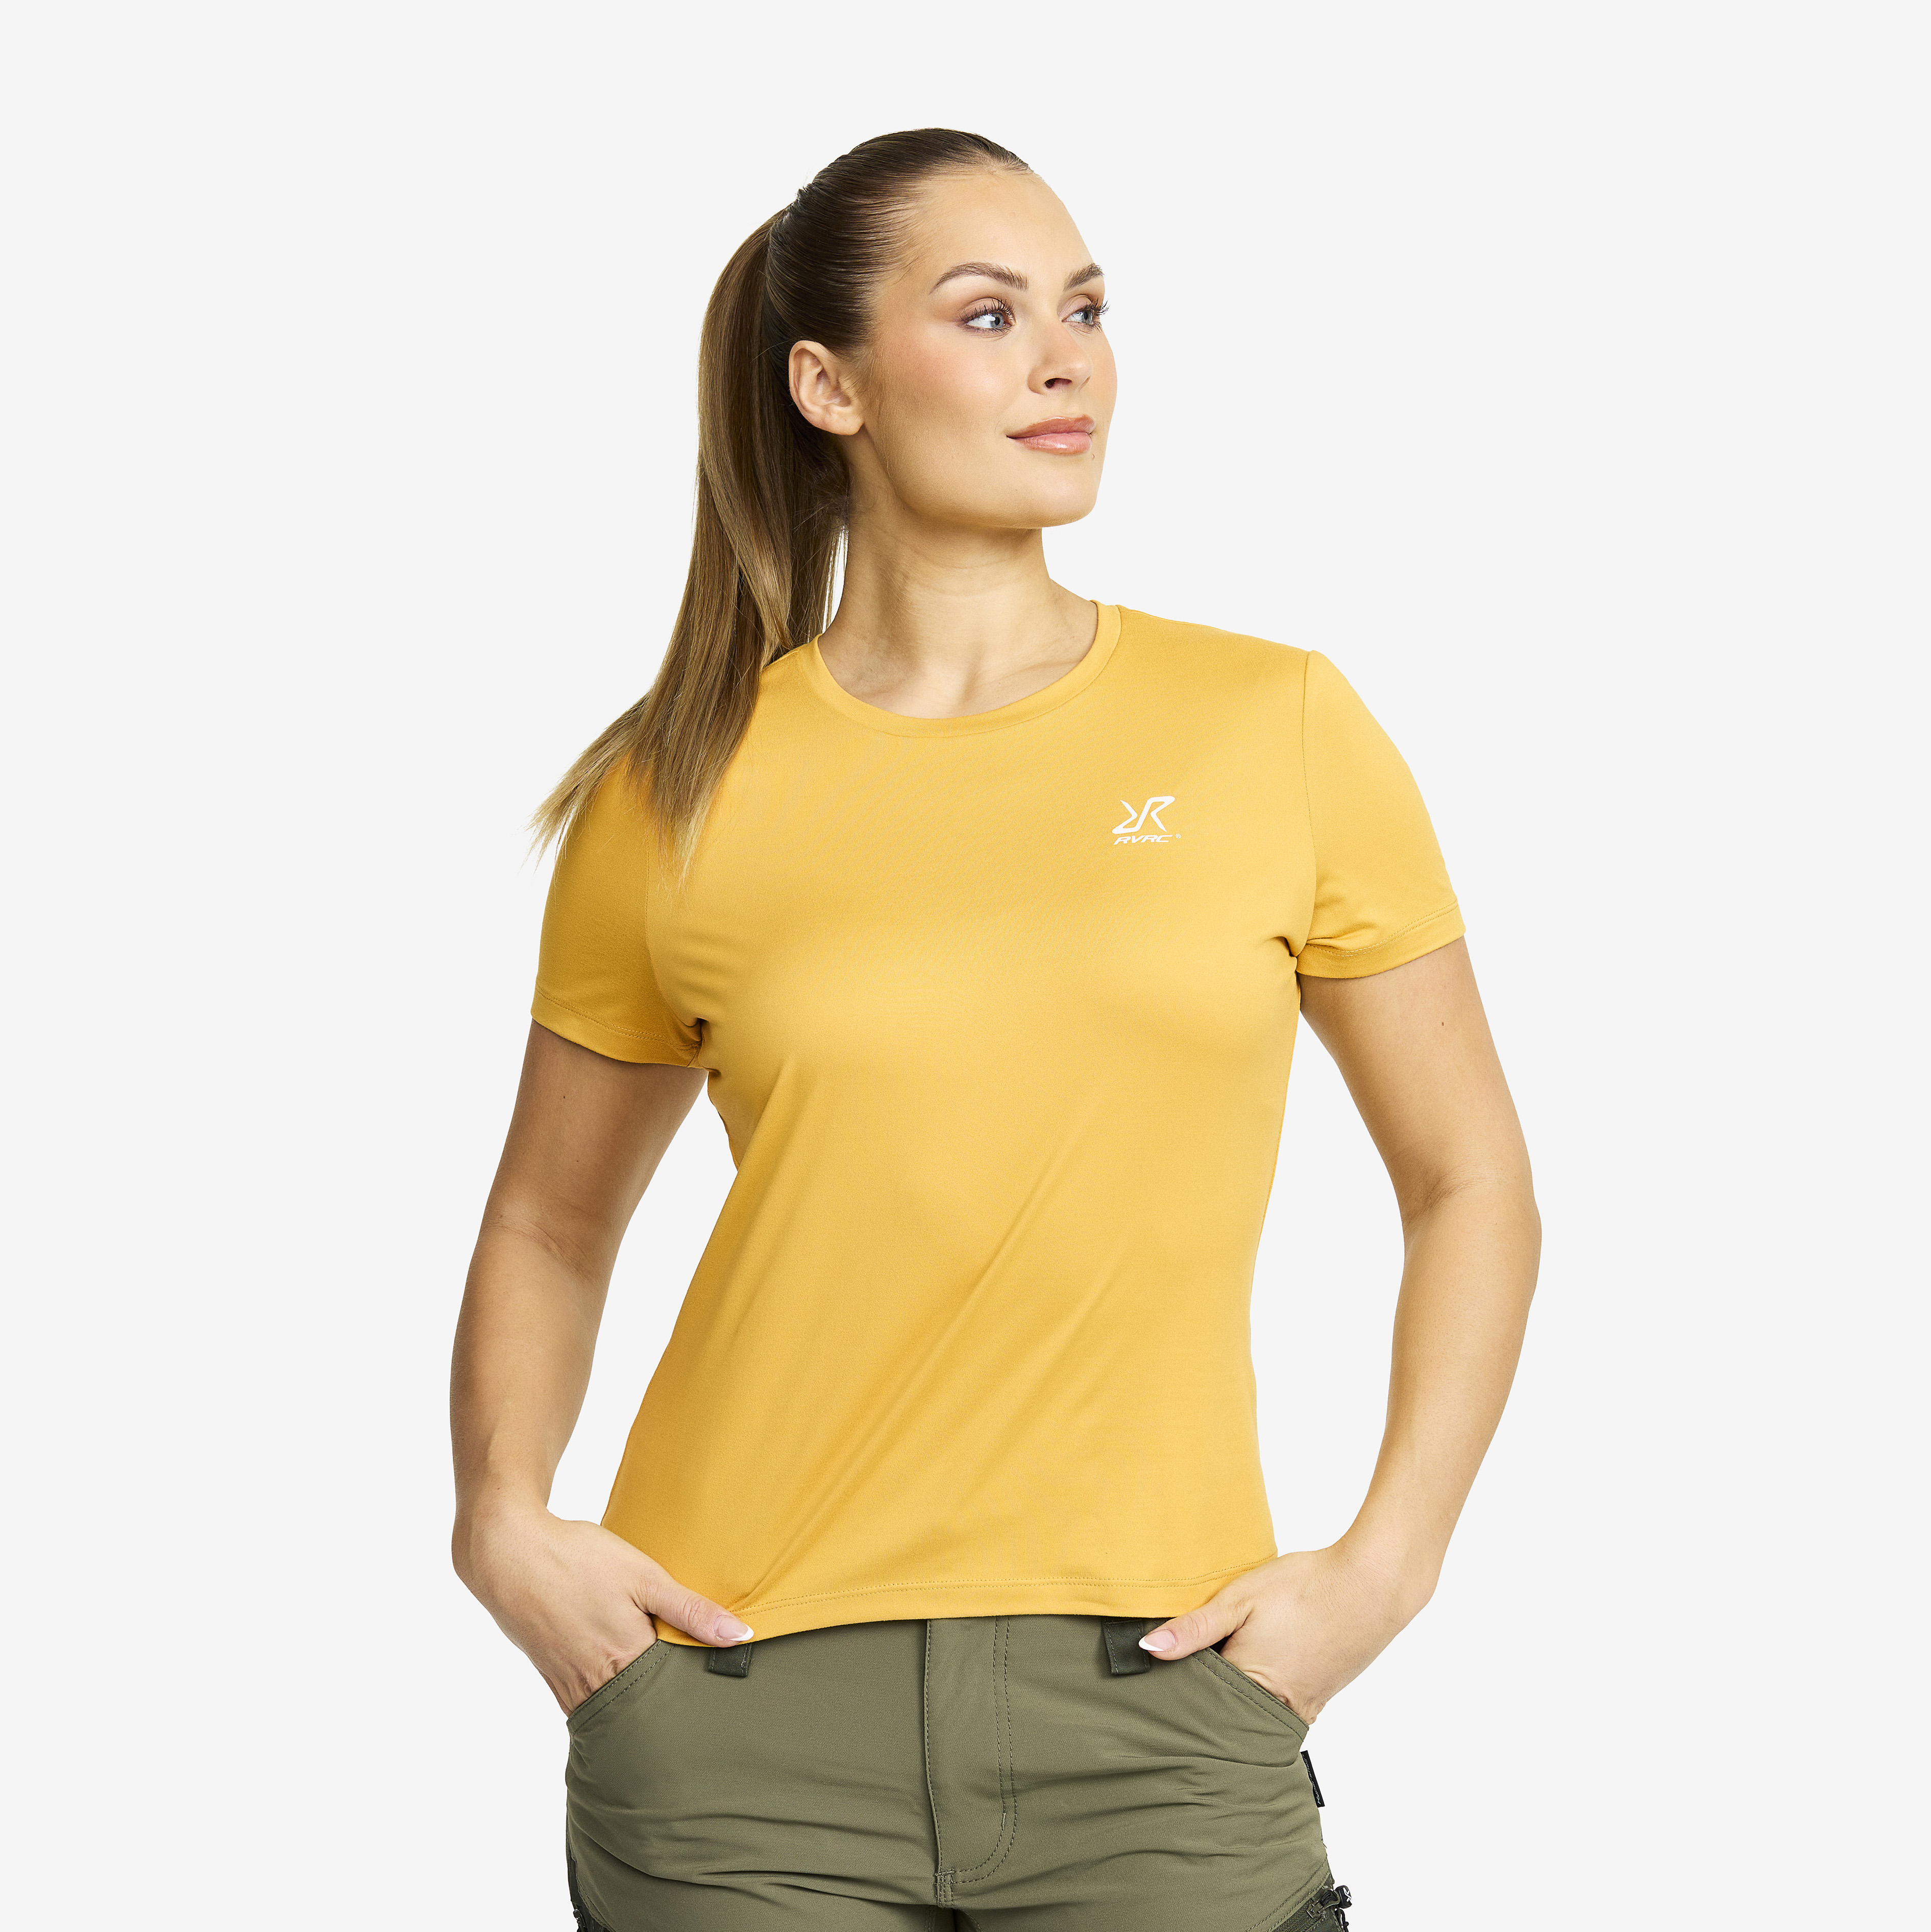 Mission T-shirt Sauterne Mujeres